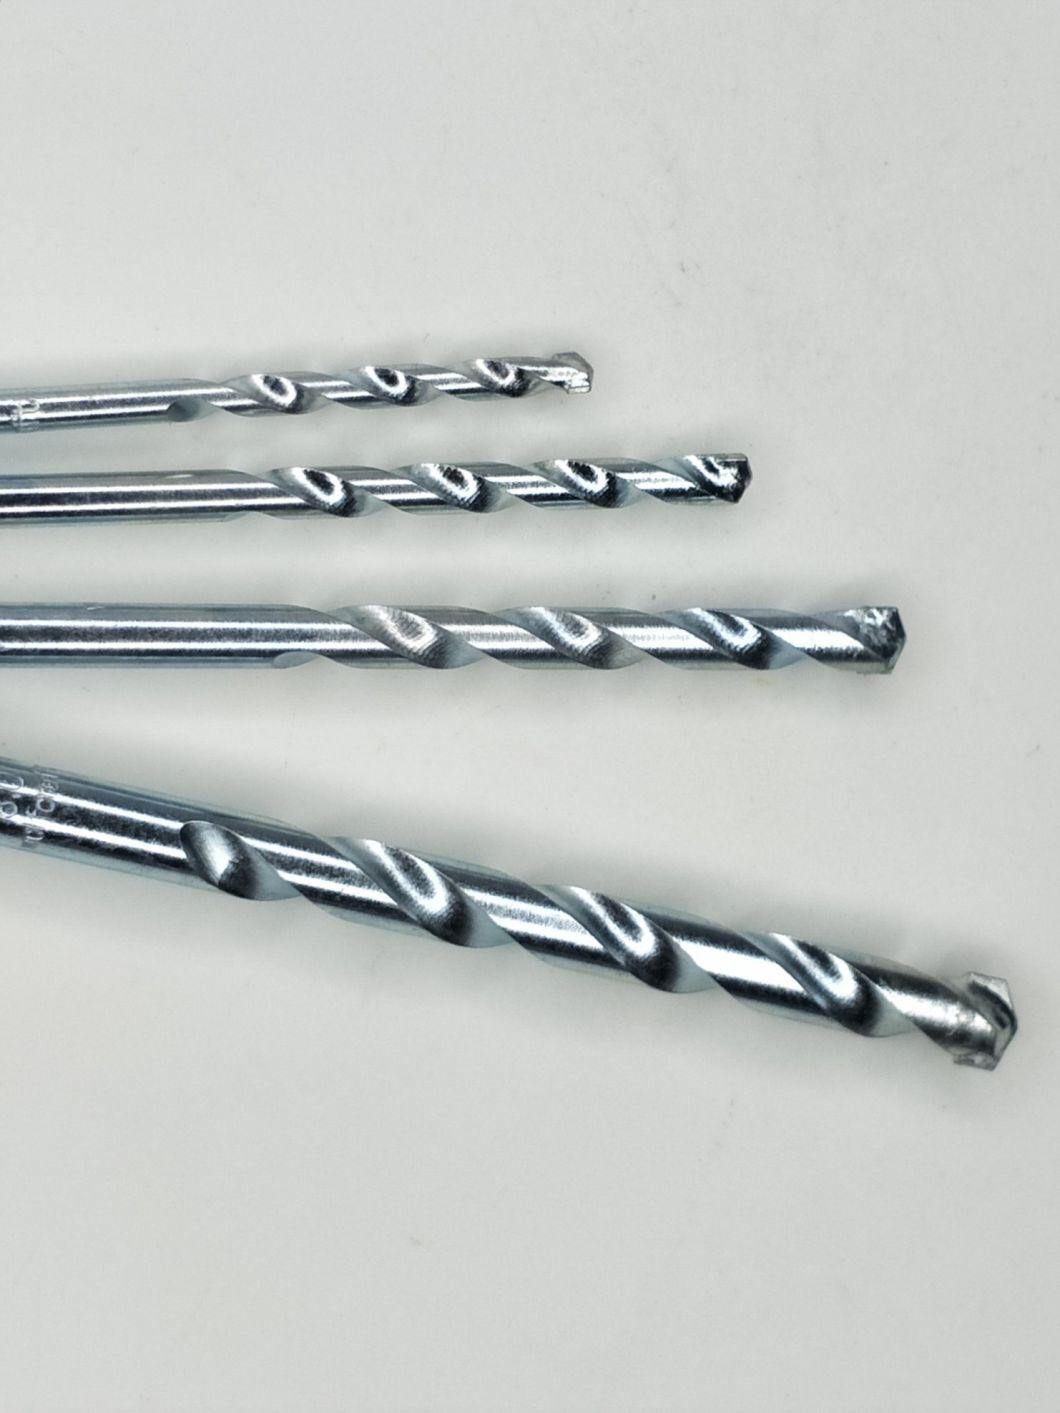 Customized Best Selling Masonry Drill Bit Available for All Sizes